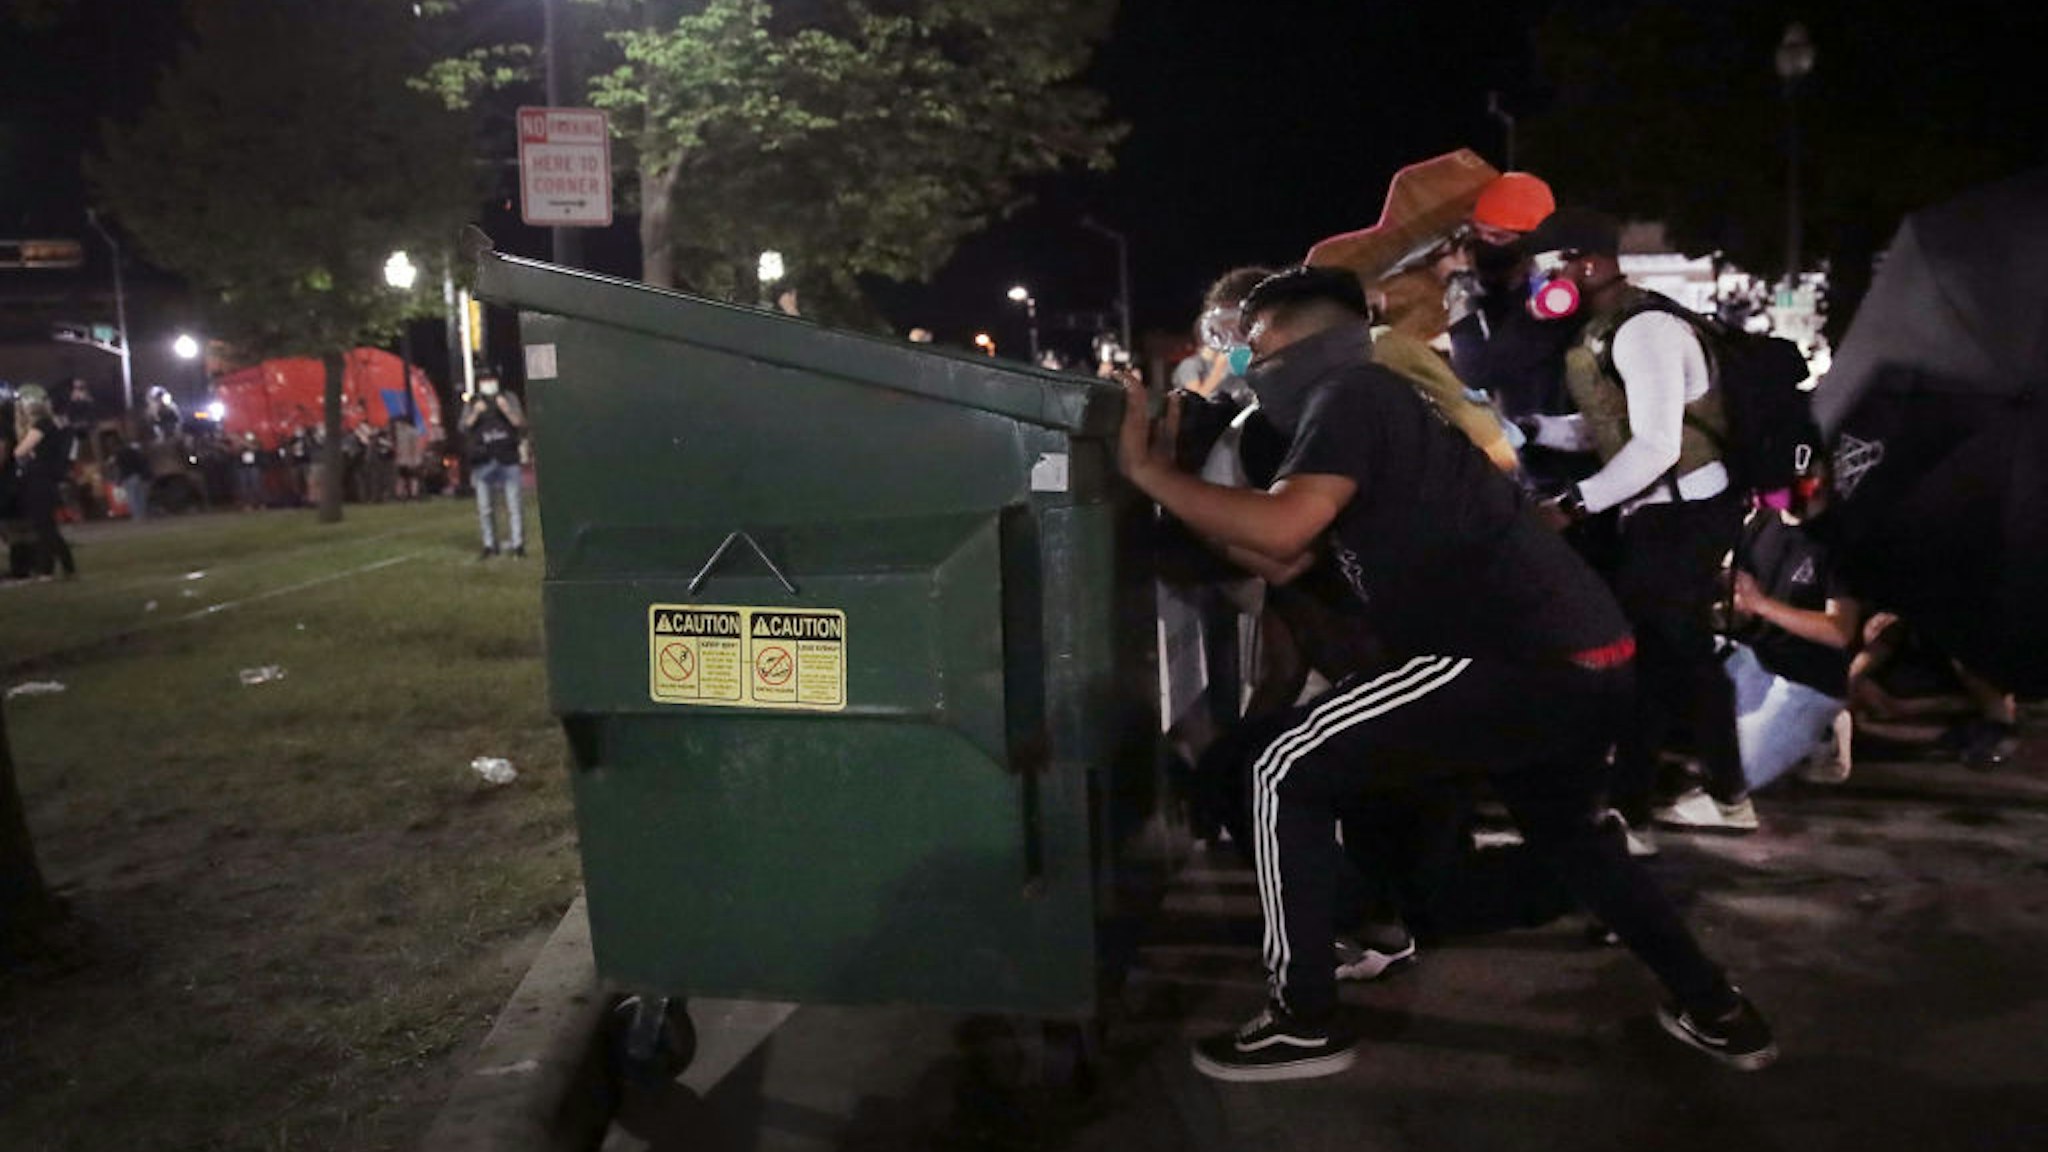 Protesters take cover behind a dumpster as they confront police in front of the Kenosha County Courthouse during a third night of unrest on August 25, 2020 in Kenosha, Wisconsin.